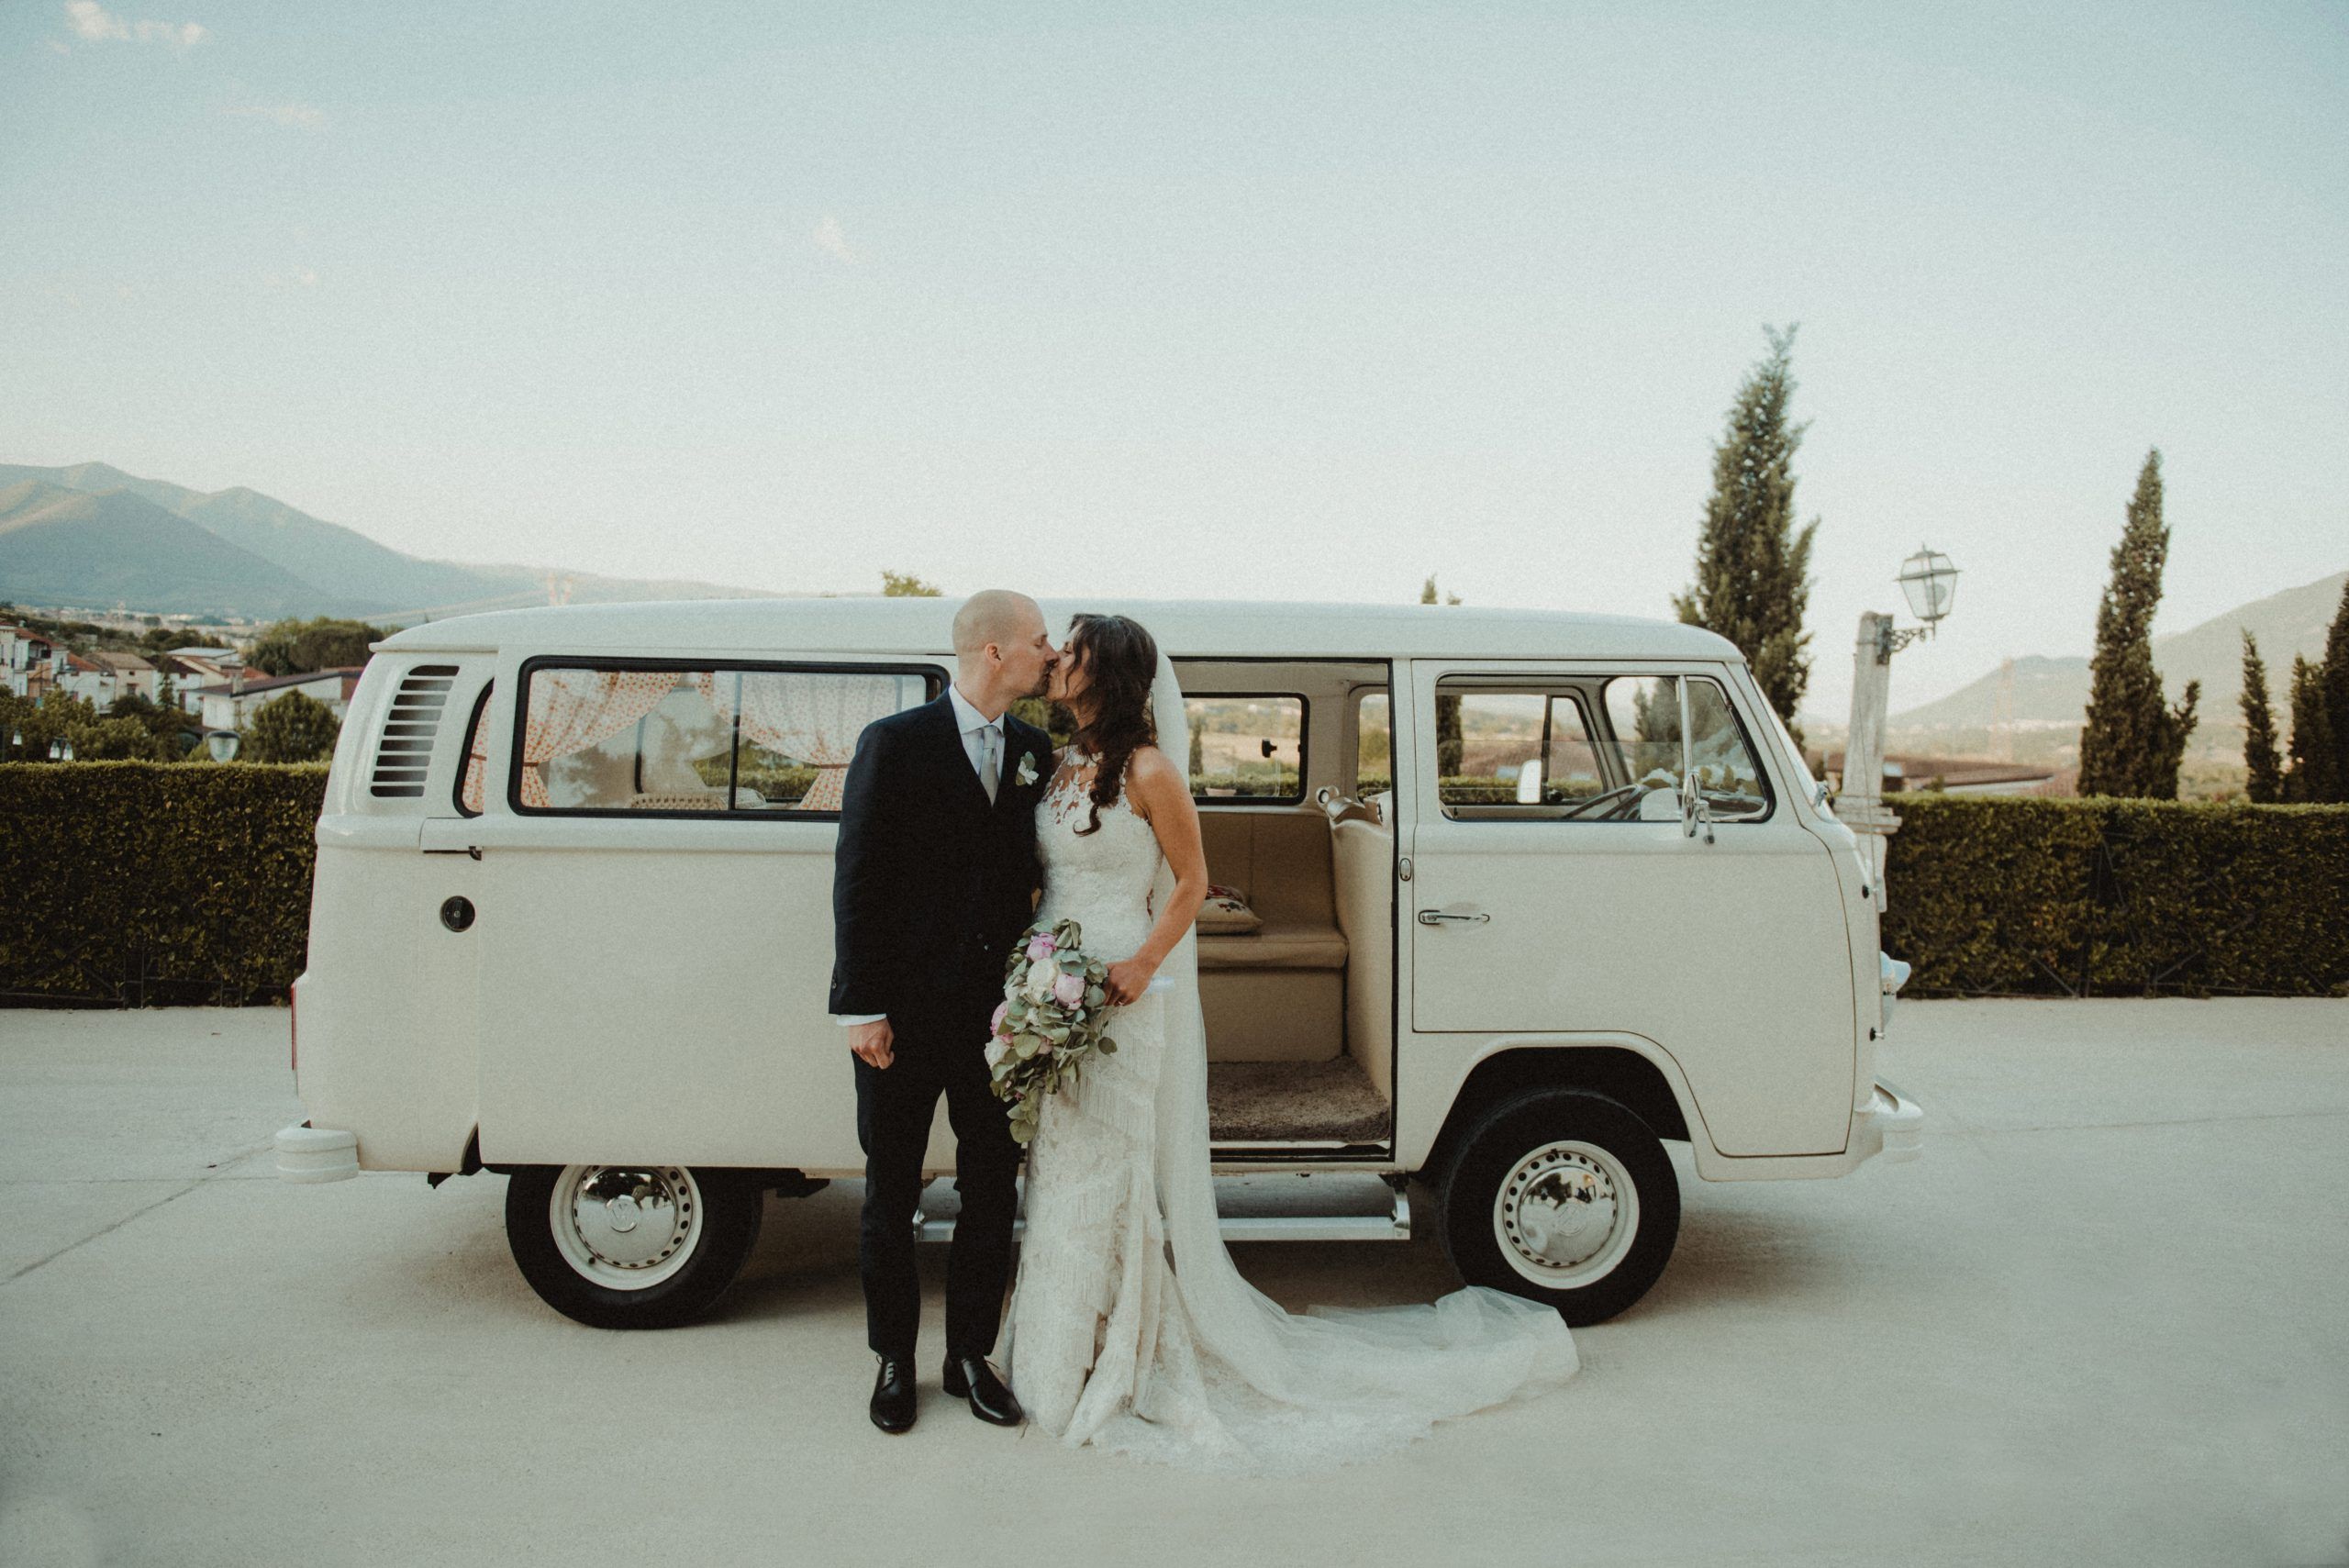 microwedding couple vw | Spark Experiences microwedding planners in the Bay Area